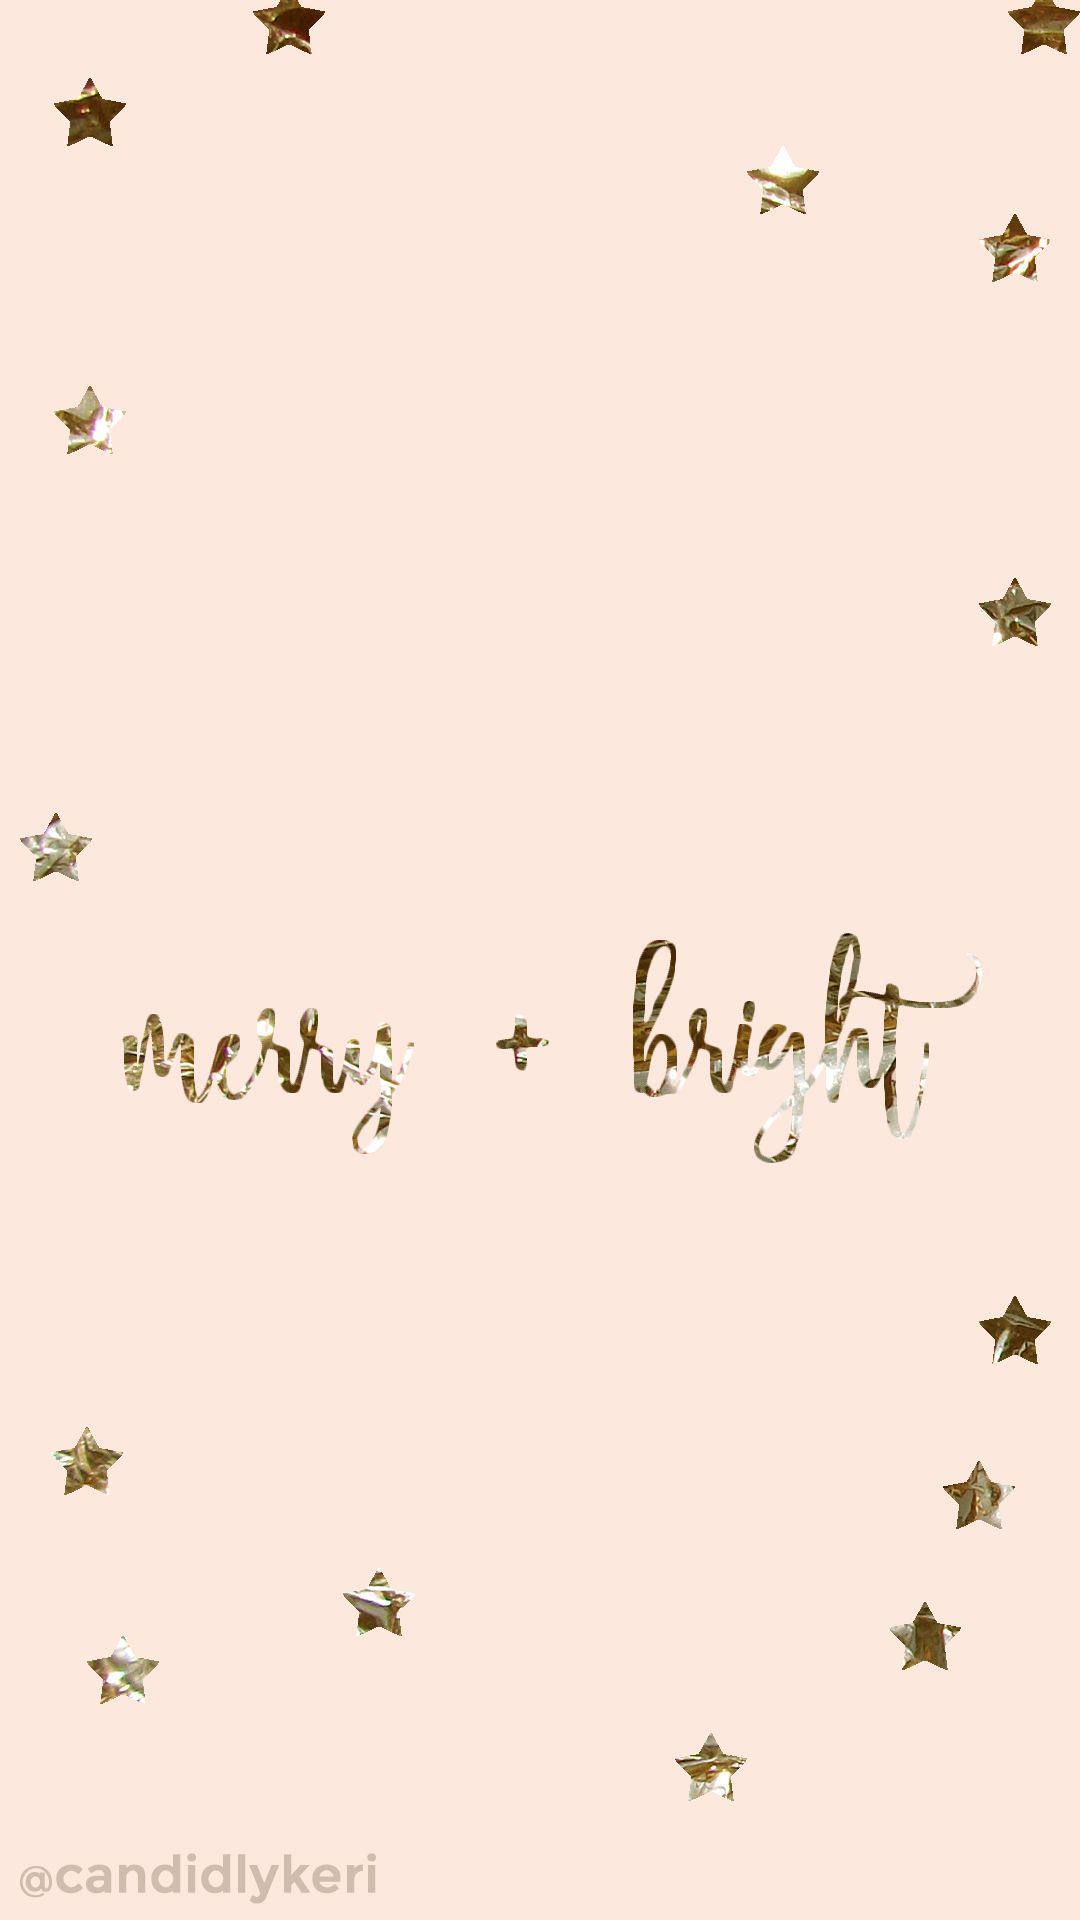 Merry and Bright gold foil pink stars background wallpaper you can down. Wallpaper iphone christmas, Christmas phone wallpaper, Free christmas wallpaper downloads